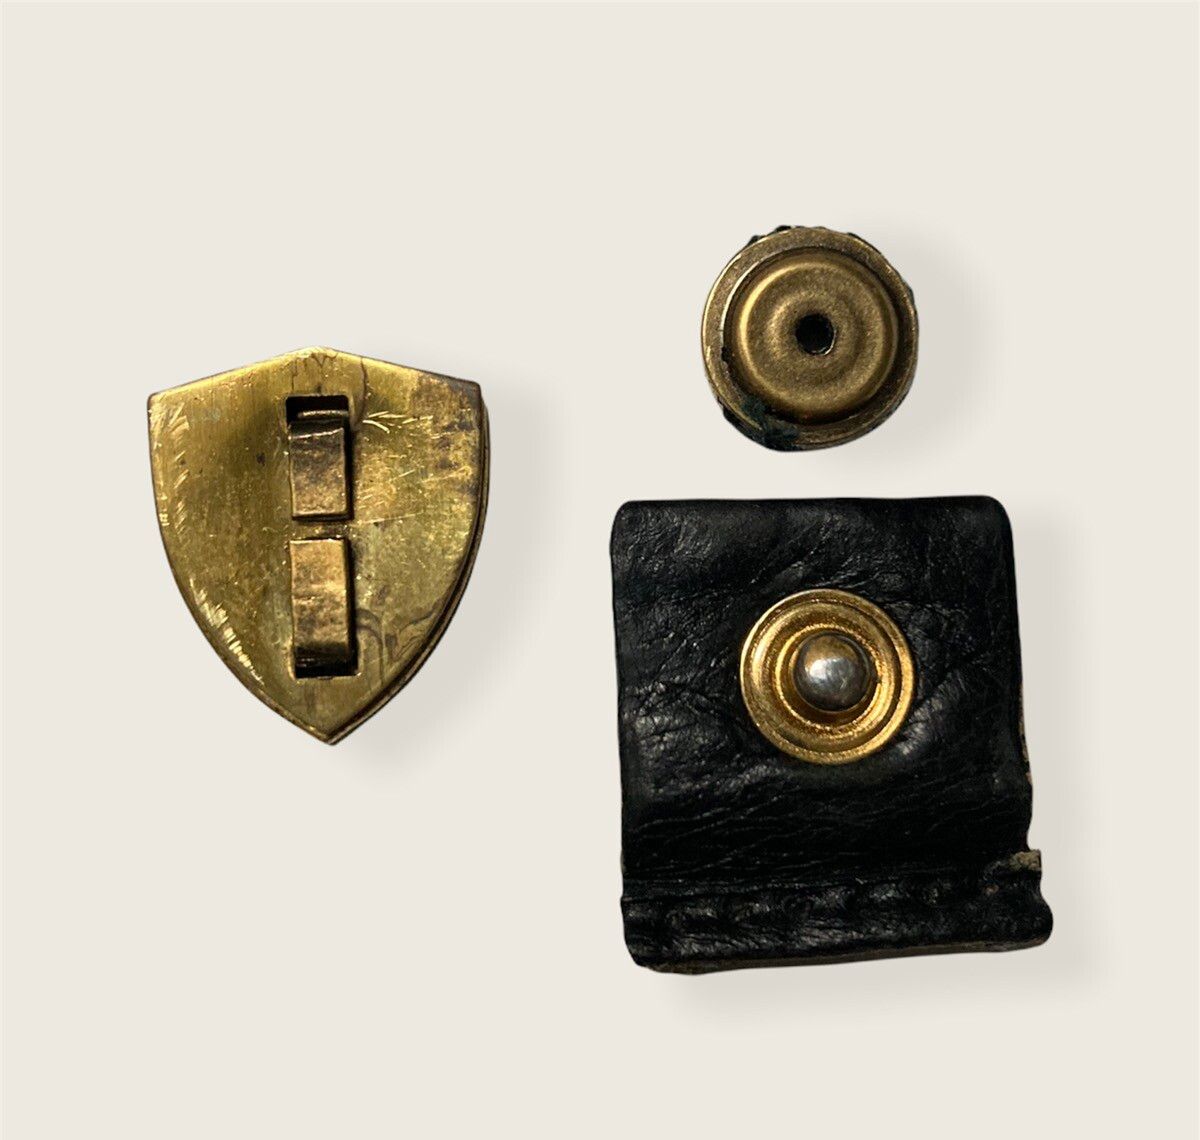 Gucci Crest Pin Emblem and Button Accessories - 5